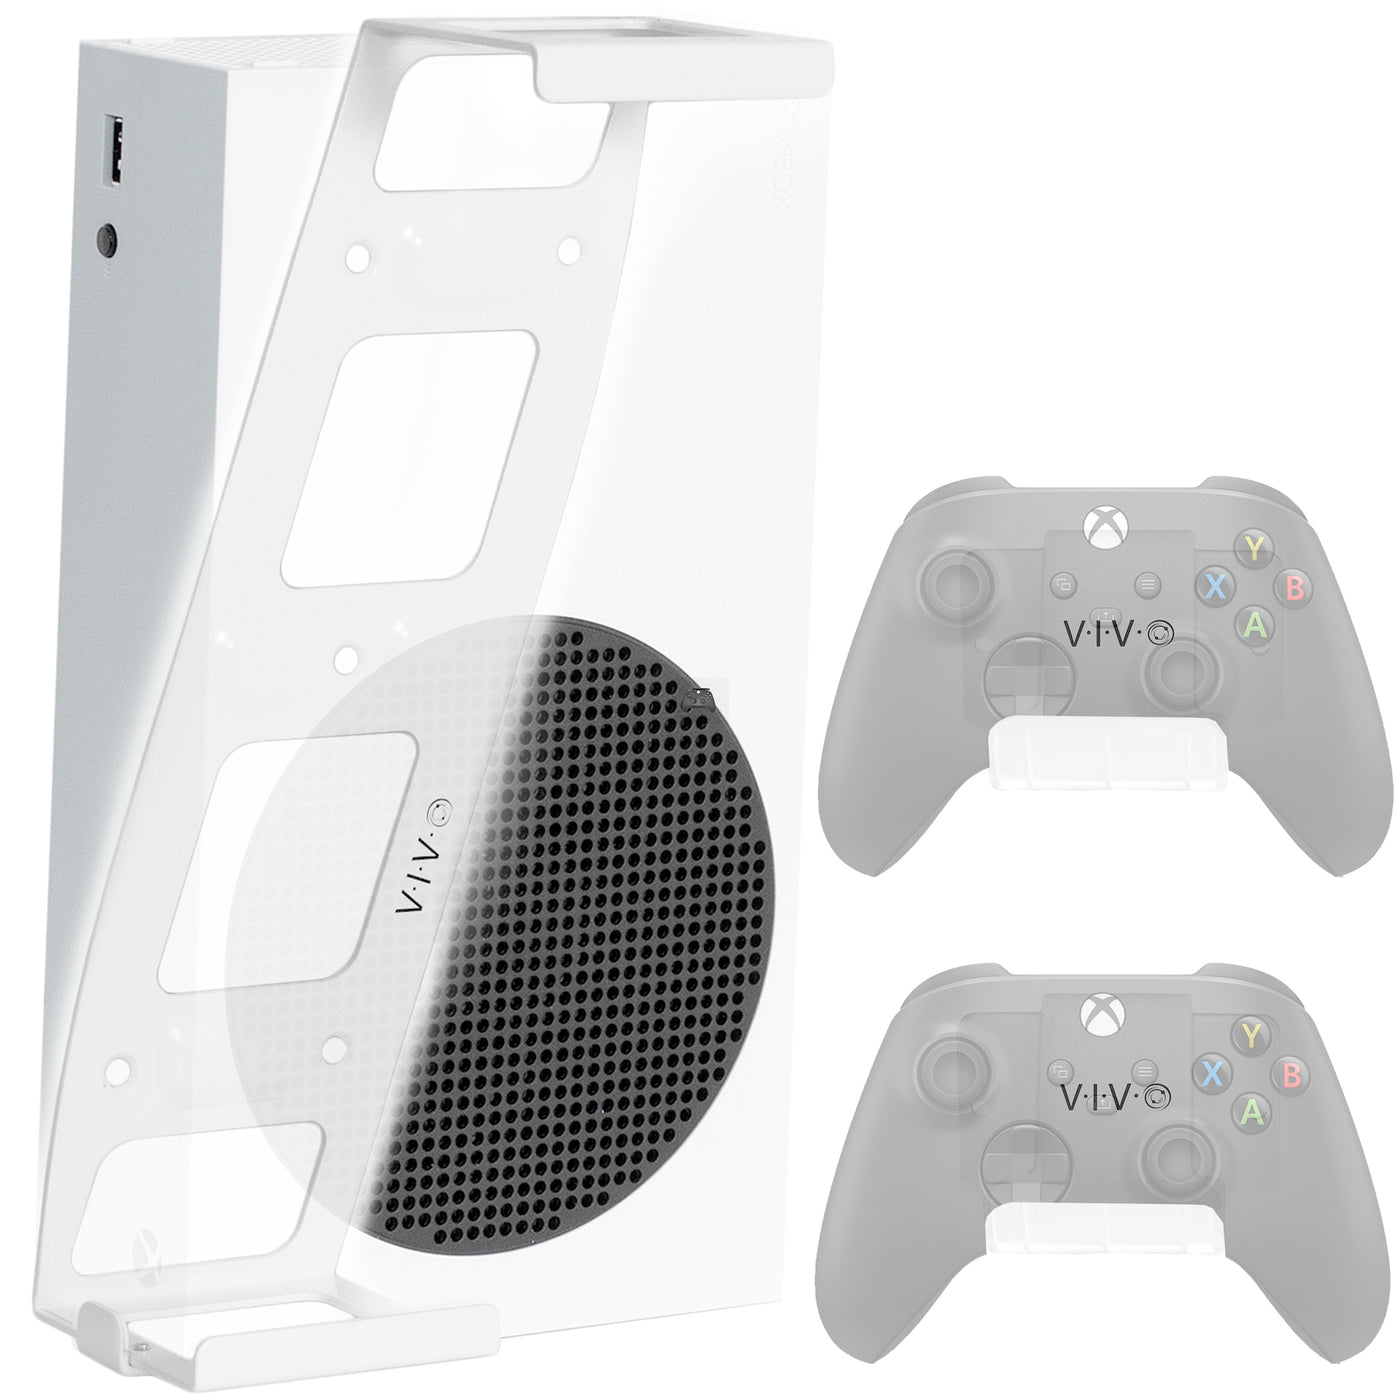 White wall mount designed for the Xbox Series S gaming console.